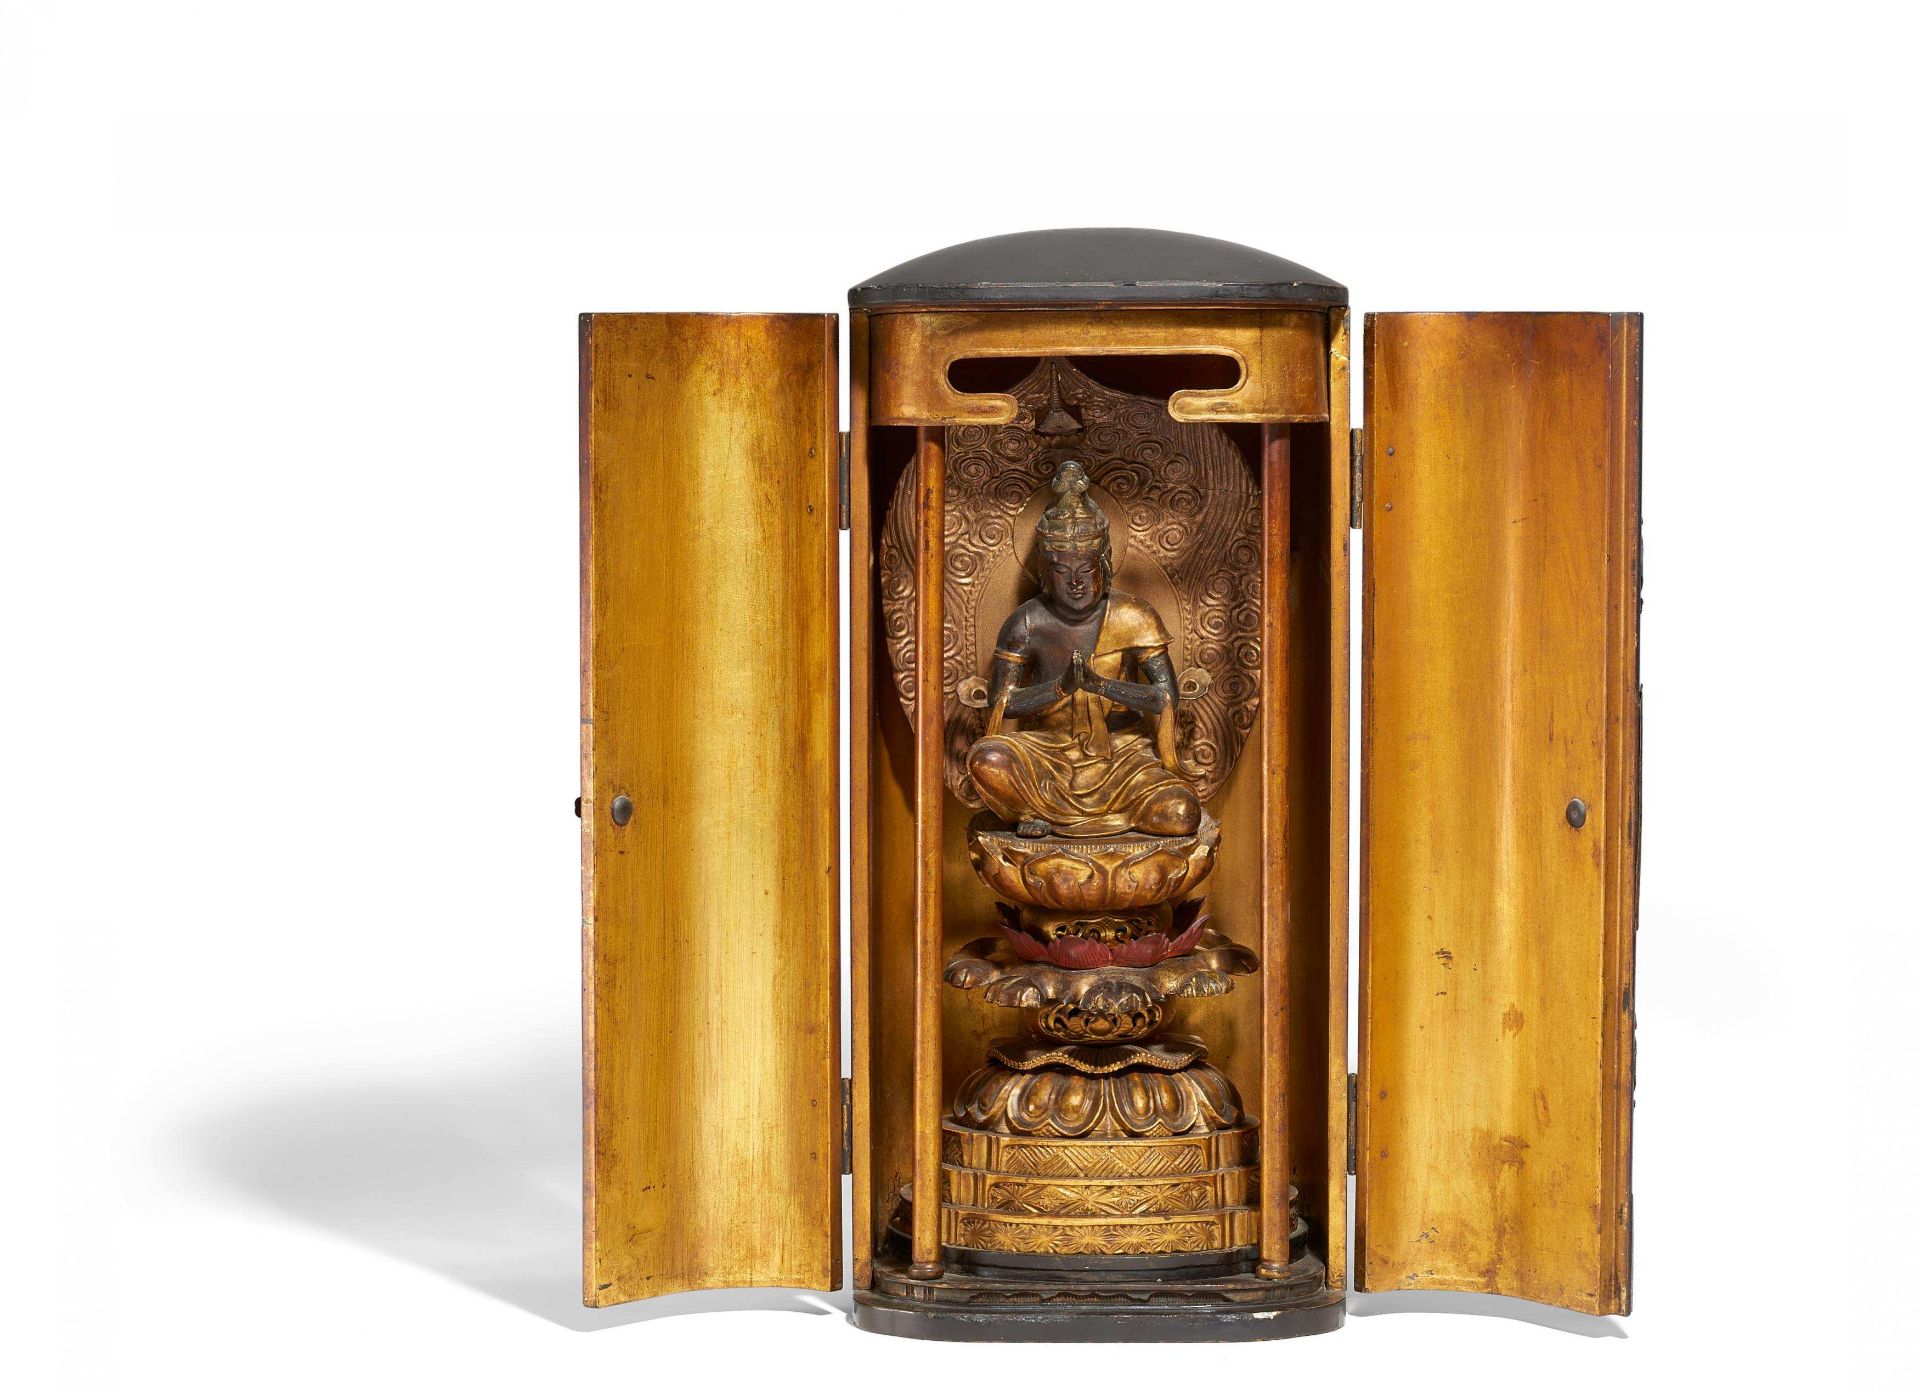 TALL ZUSHI WITH SEISHI BODHISATTVA. Japan. 18th/19th c. Wood, carved, lacquered and gilt, brass